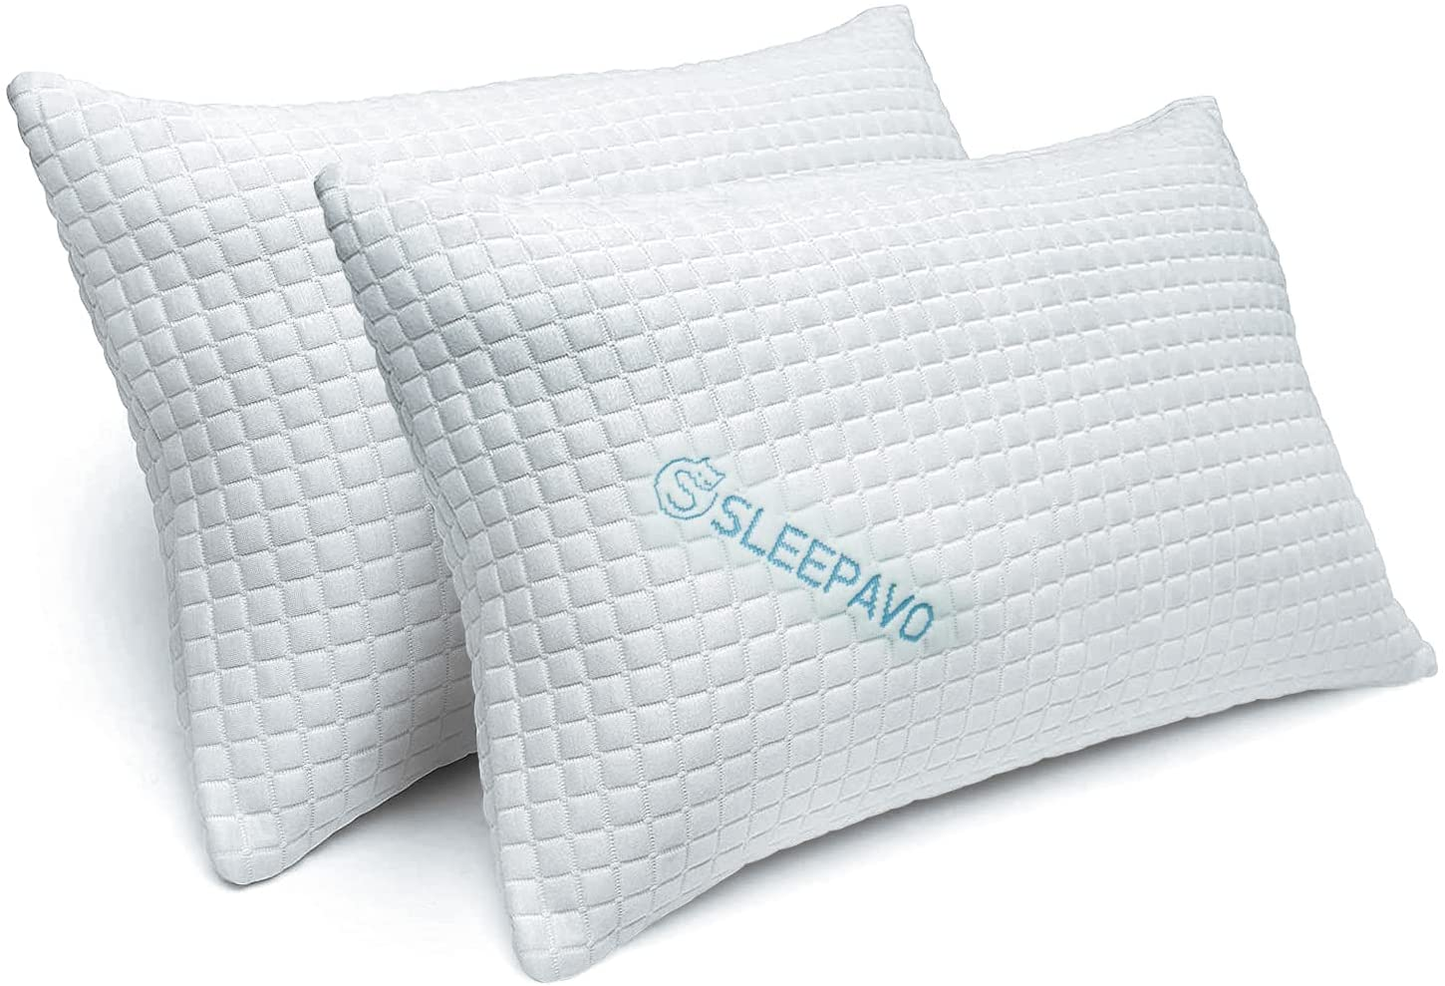 Memory Foam Pillows Queen Size Set of 2 - Bamboo Cooling Bed Pillows for Sleeping for Stomach, Back and Side Sleeper - Firm Cool Shredded Memory Foam Pillows 2 Pack Queen Pillows Sets - Memory Pillow